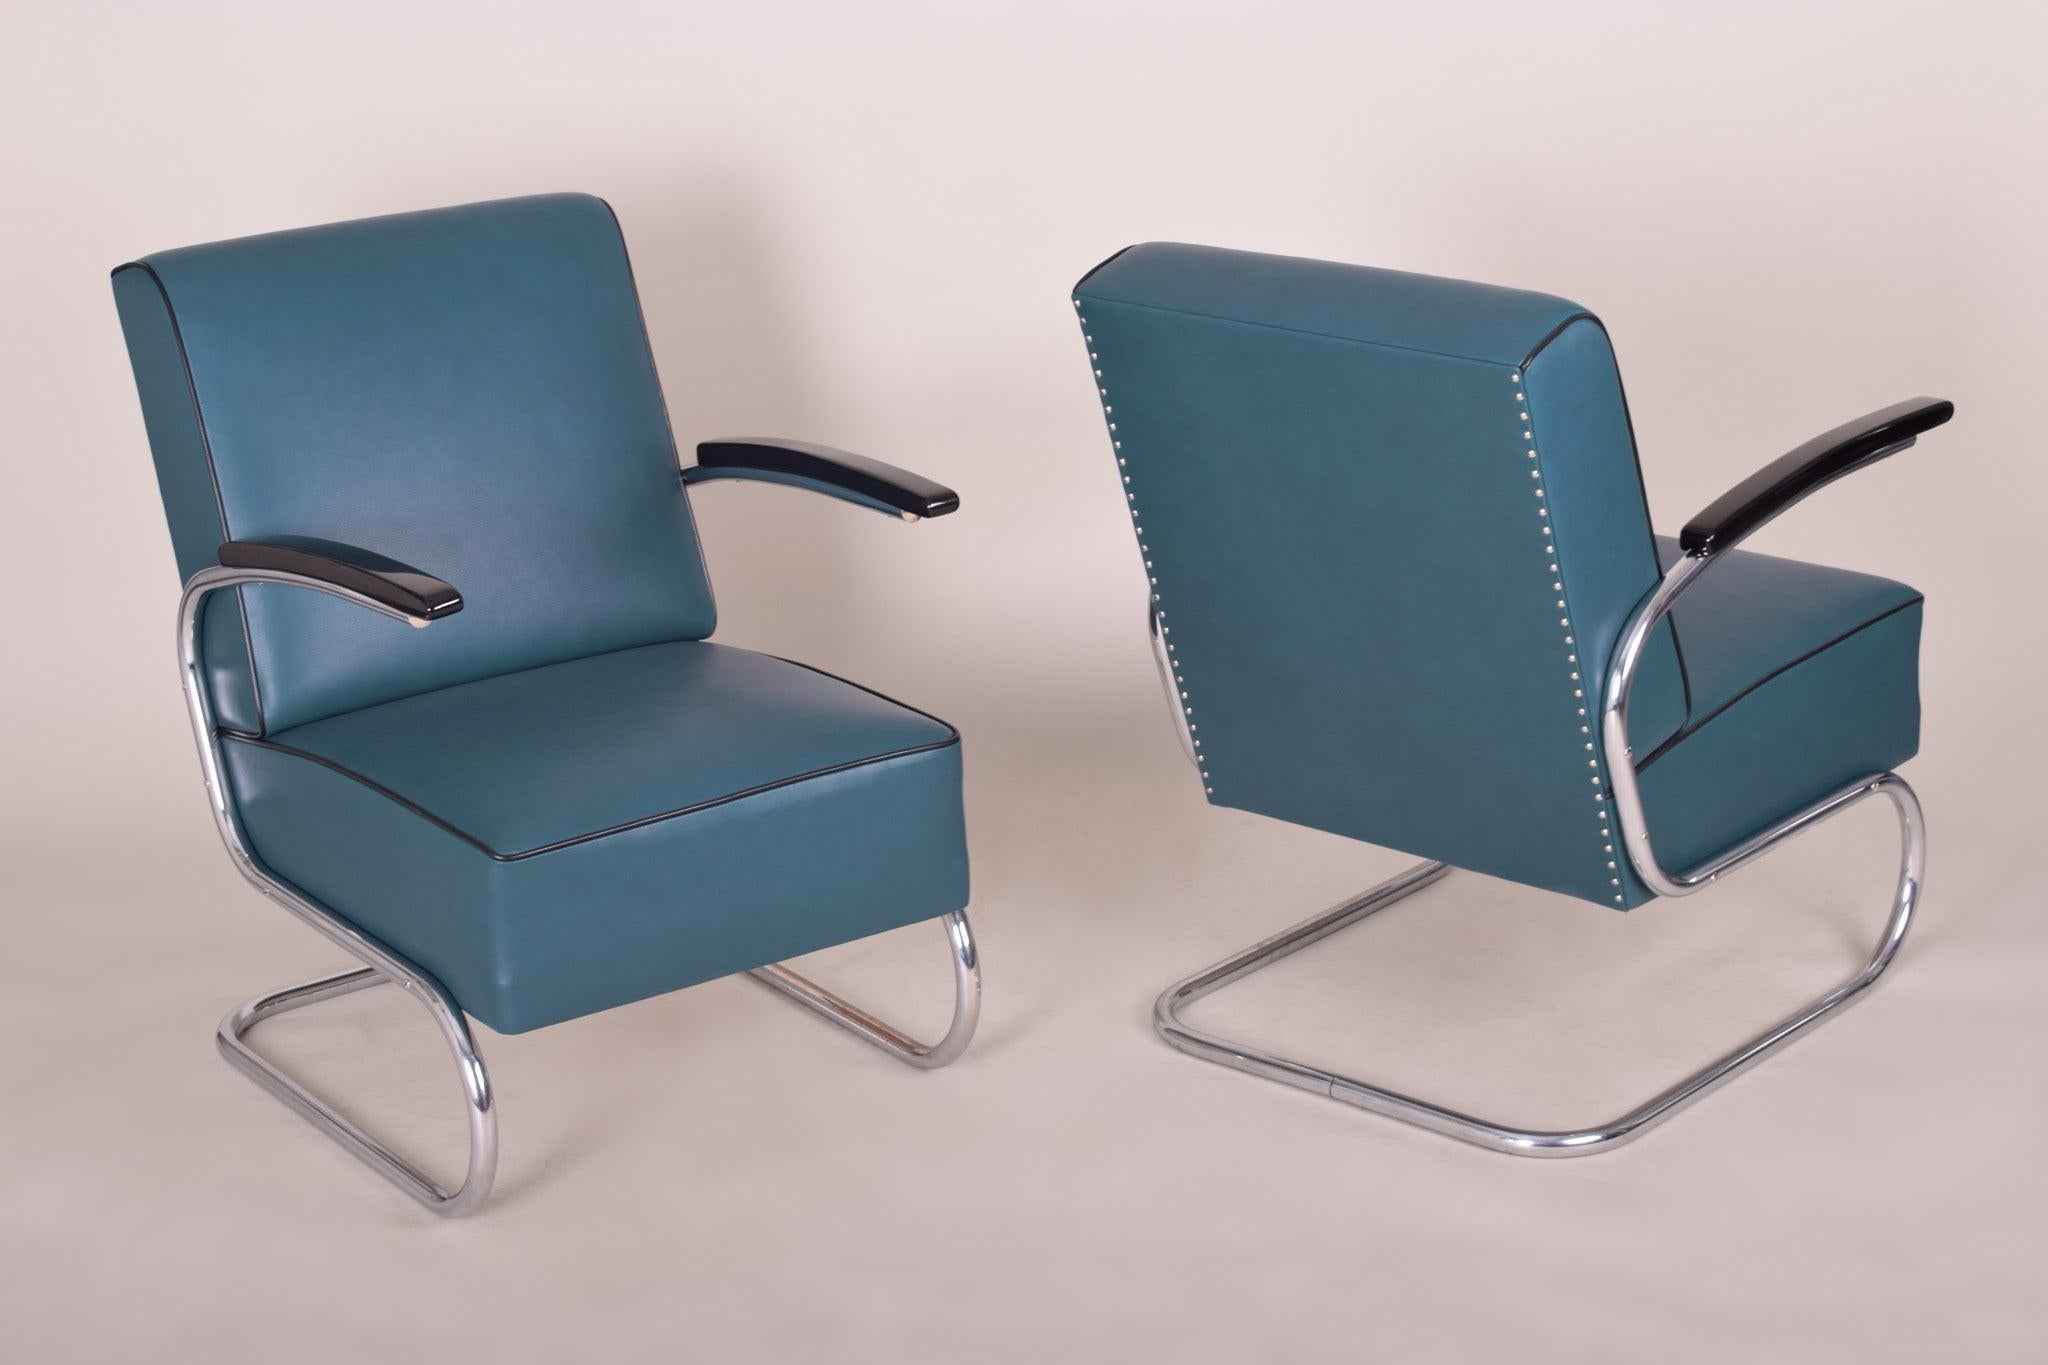 Fabric Bauhaus Tubular Chrome Armchairs by Mücke Melder, Restored Leather, 1930s For Sale